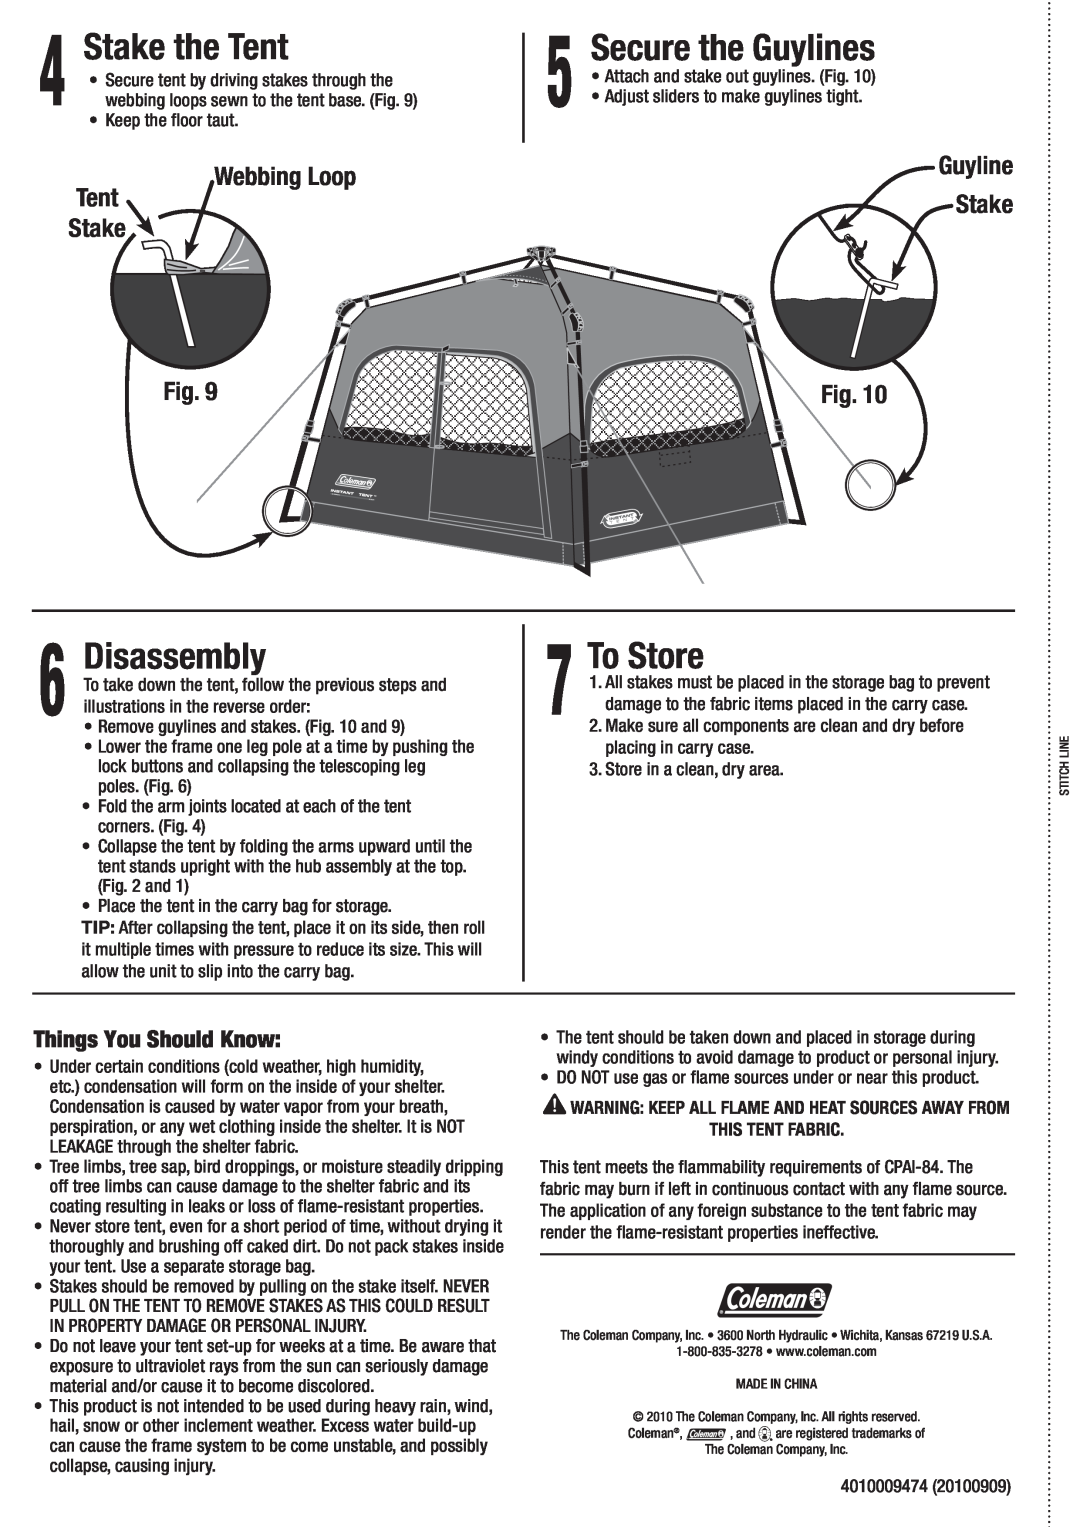 Coleman 2000007831 Stake the Tent, Disassembly, To Store, Webbing Loop Tent Stake, Guyline Stake, Things You Should Know 